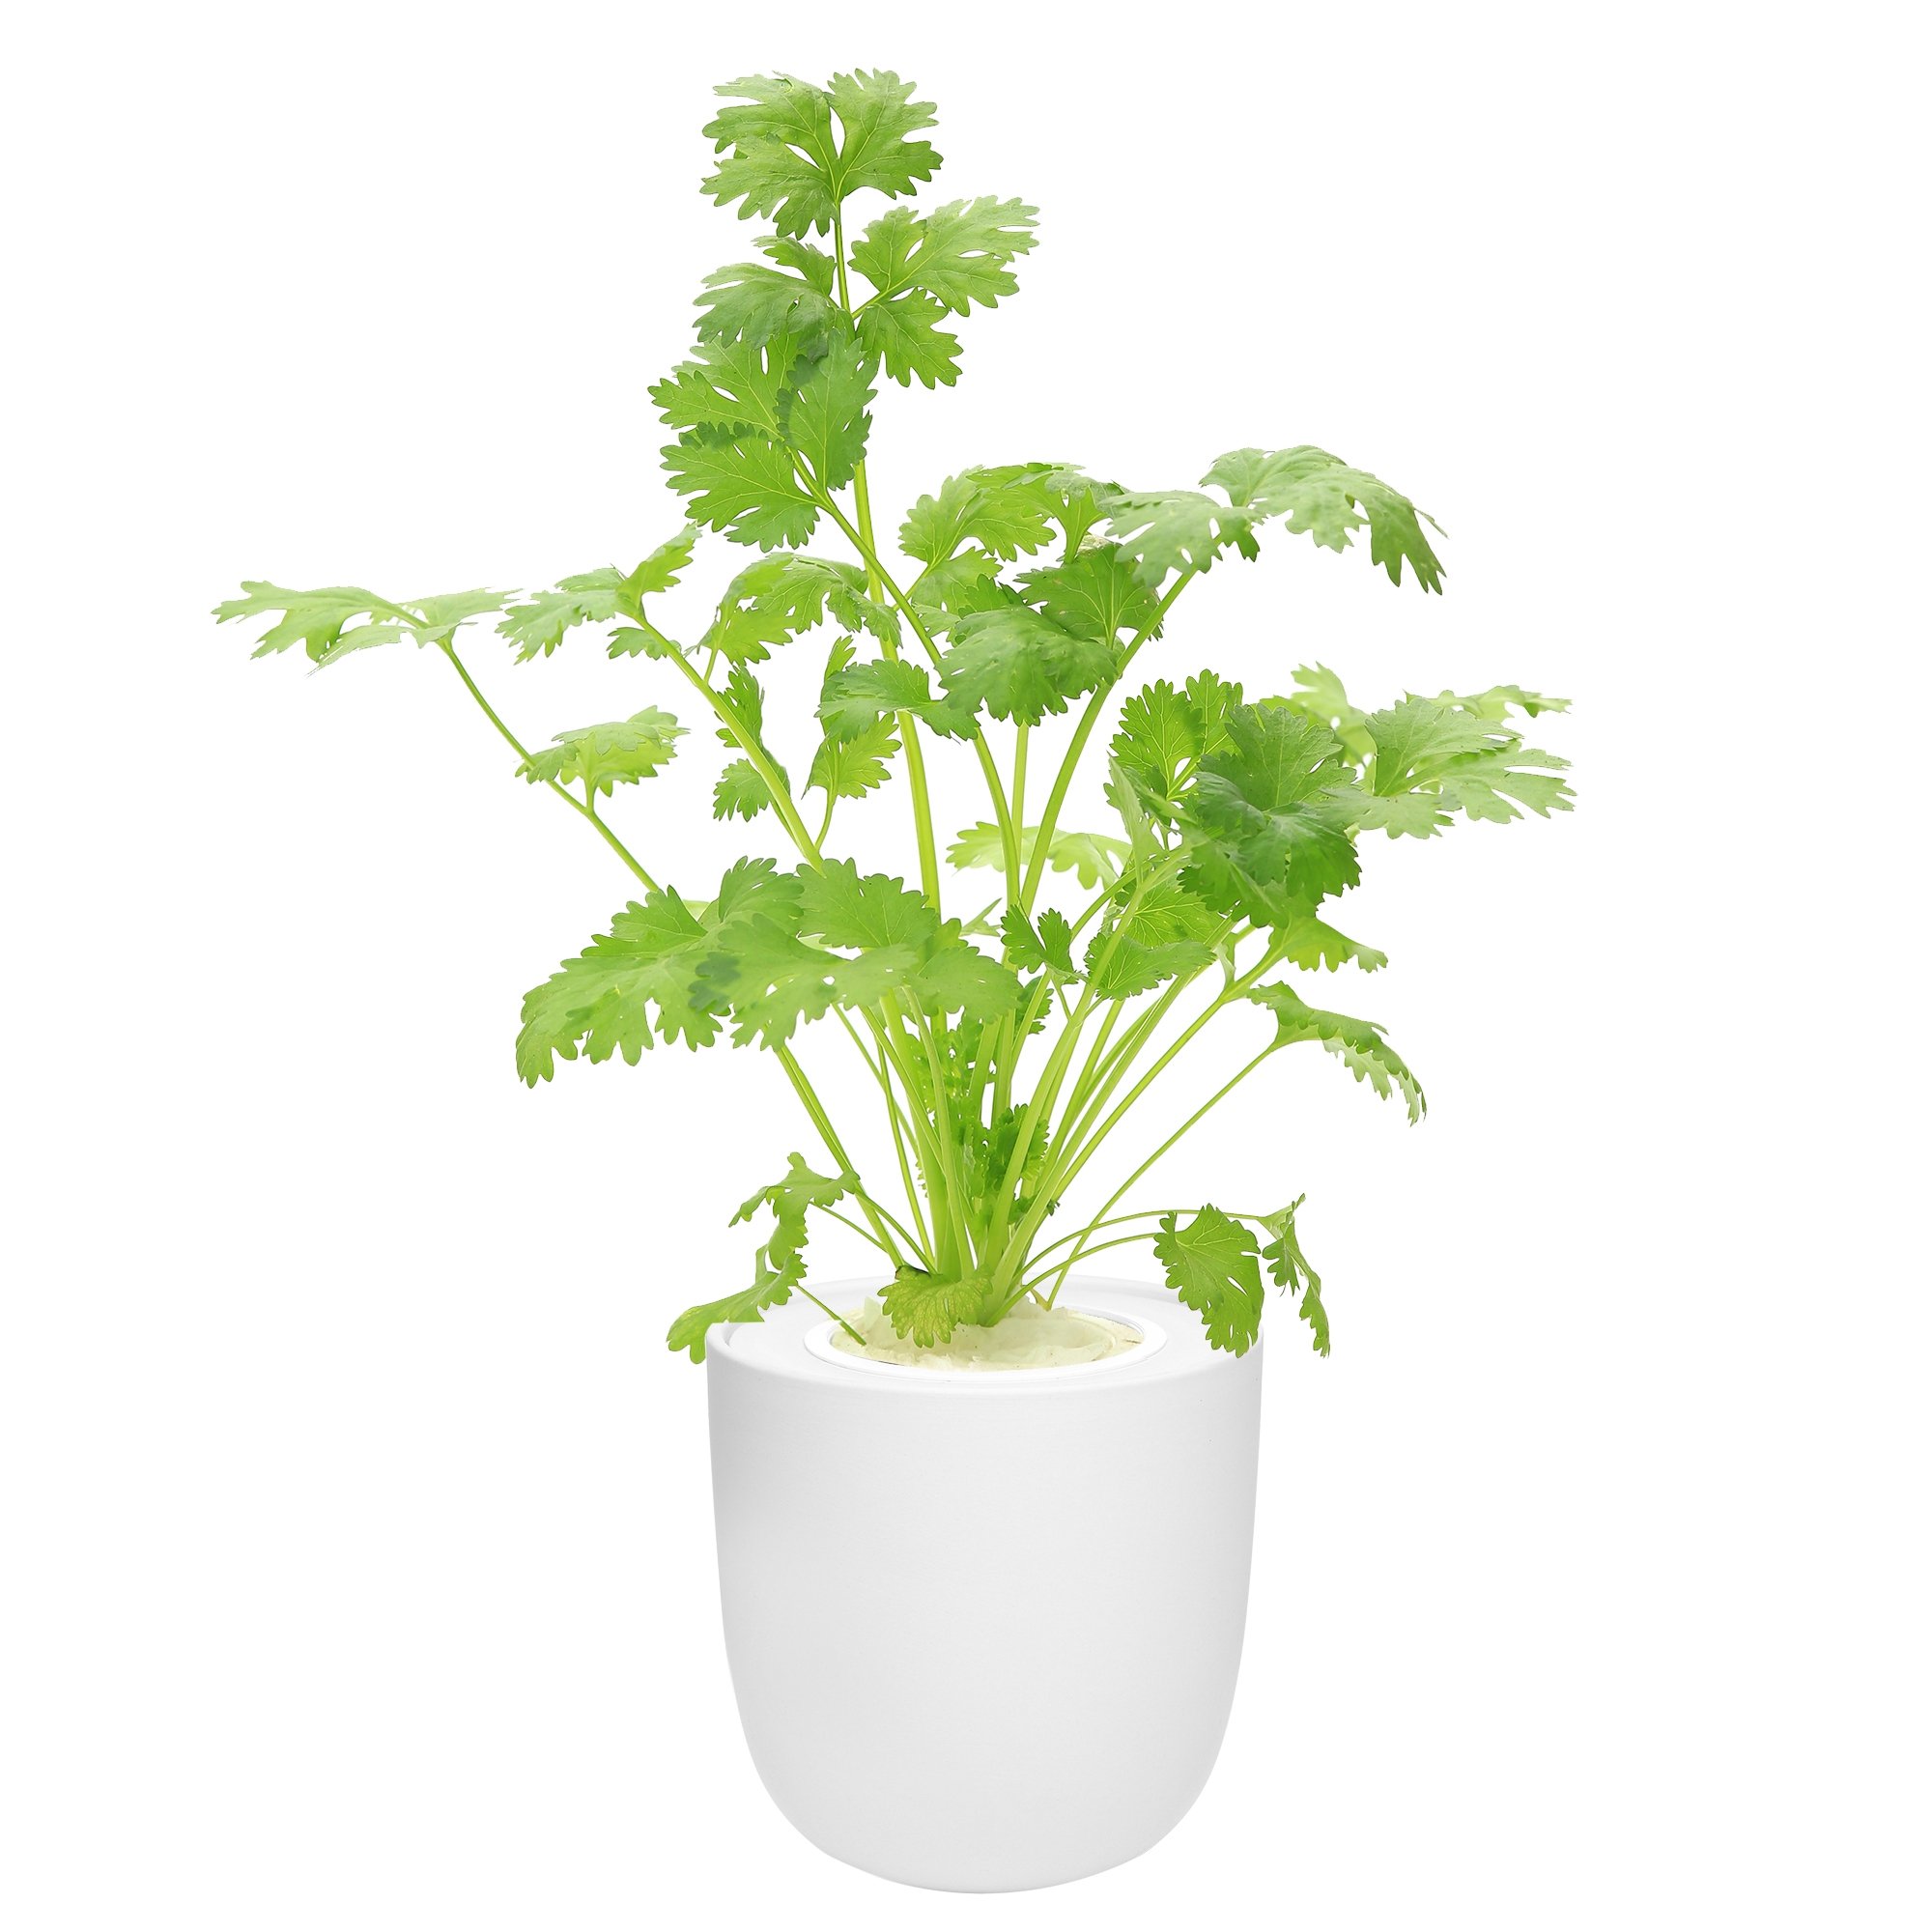 Hydroponic Herb Growing Kit with White Ceramic Pot and Seeds (Cilantro)